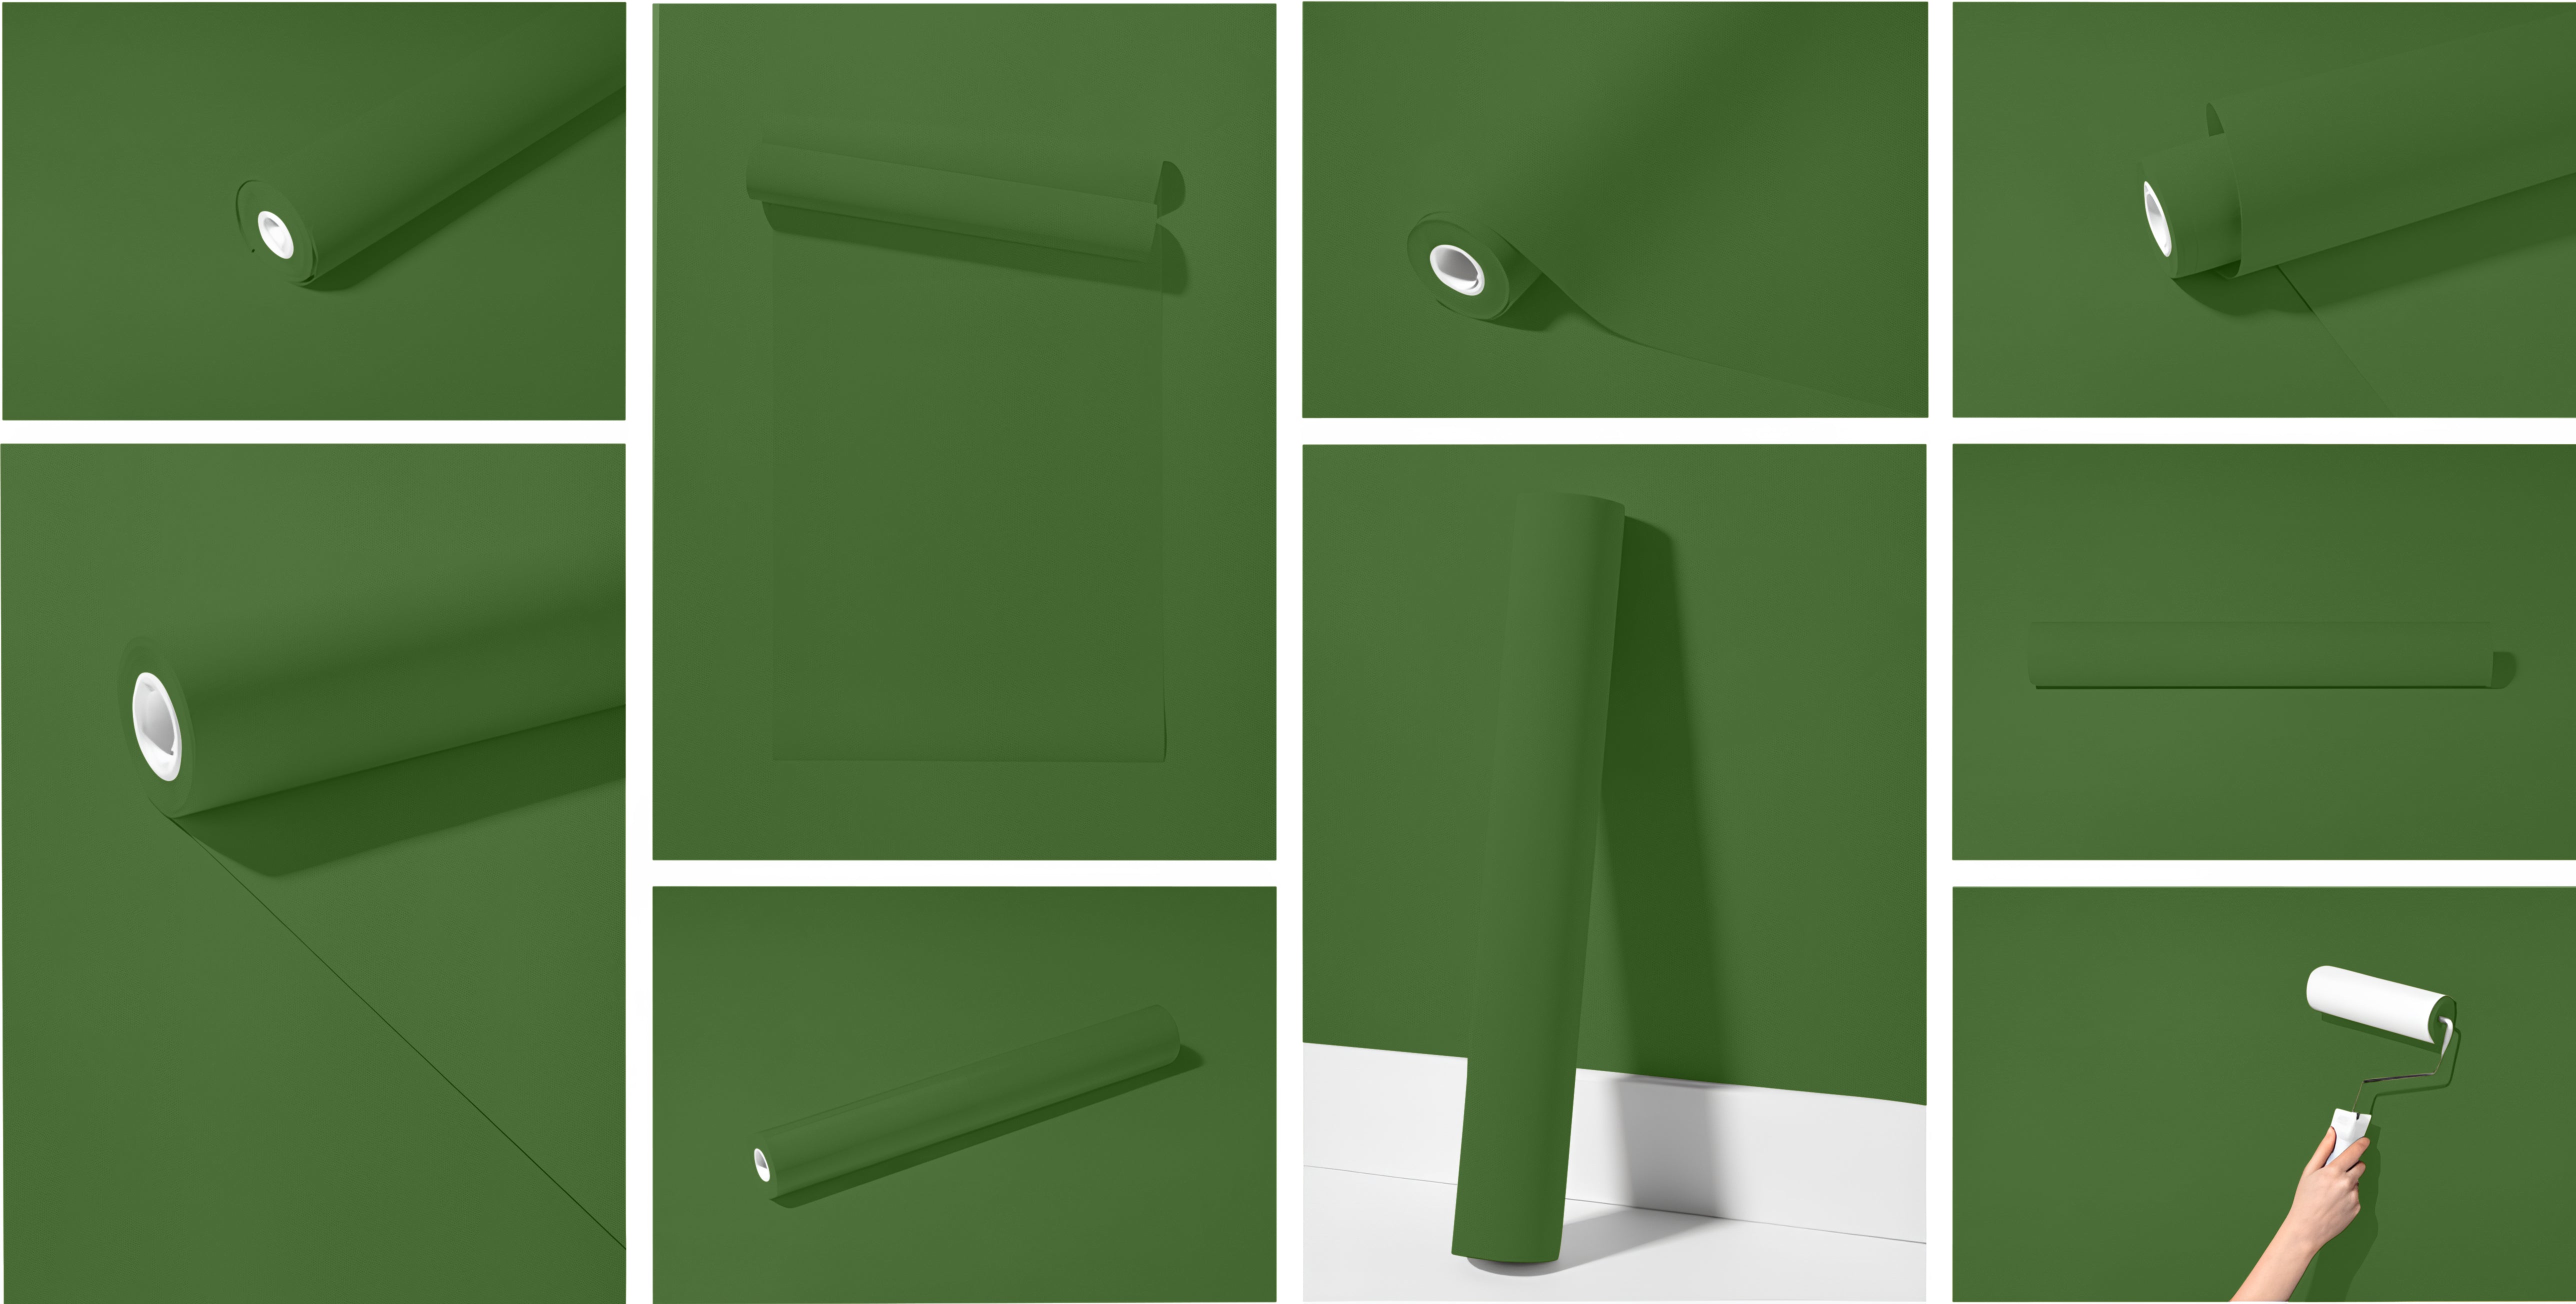 Peel & Stick Removable Re-usable Paint - Color RAL 6010 Grass Green - offRAL™ - RALRAW LLC, USA